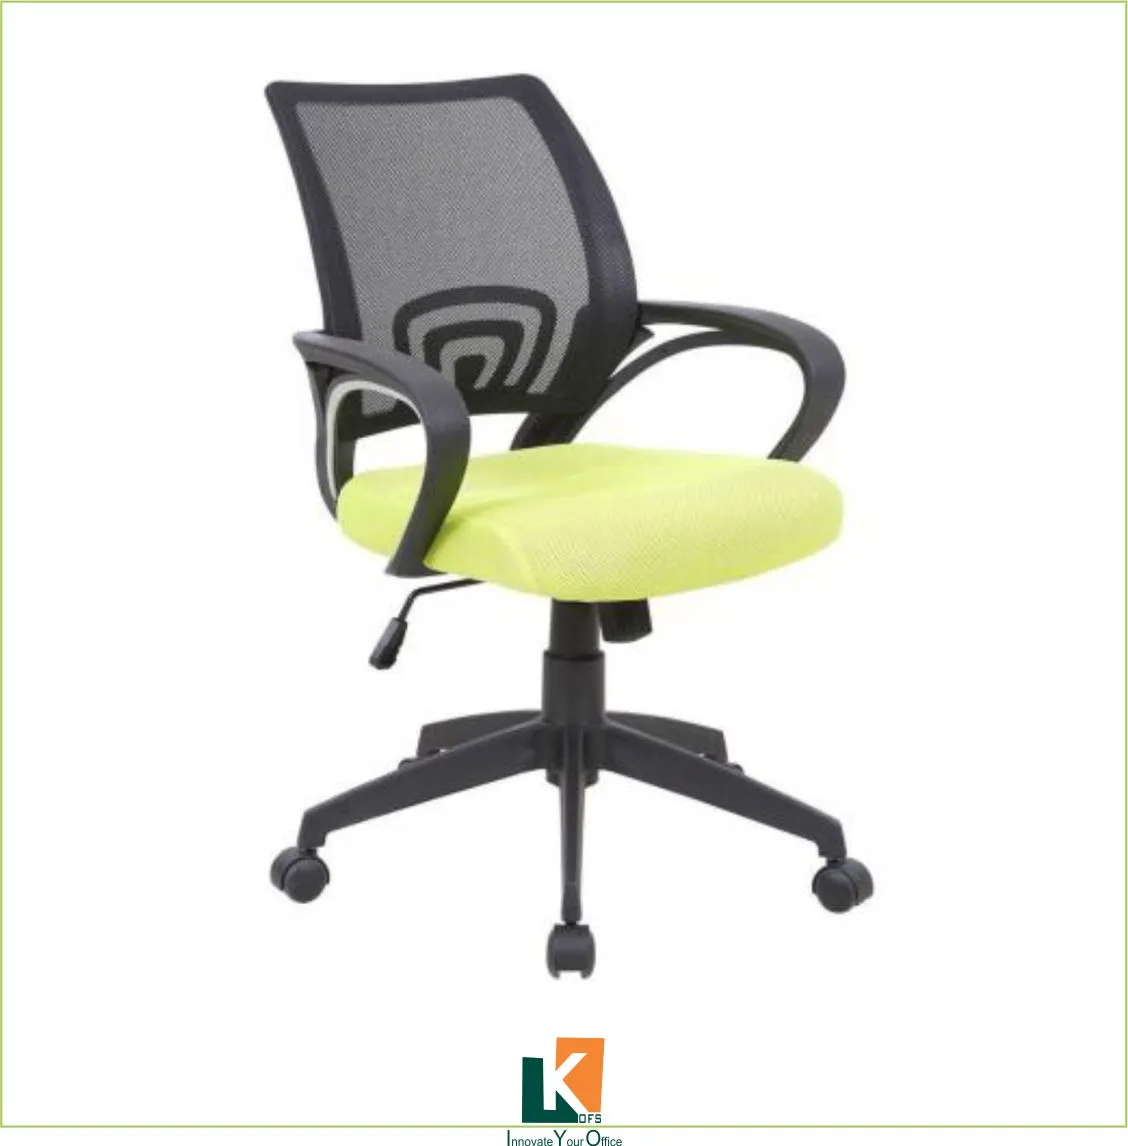 Low back workstation chair